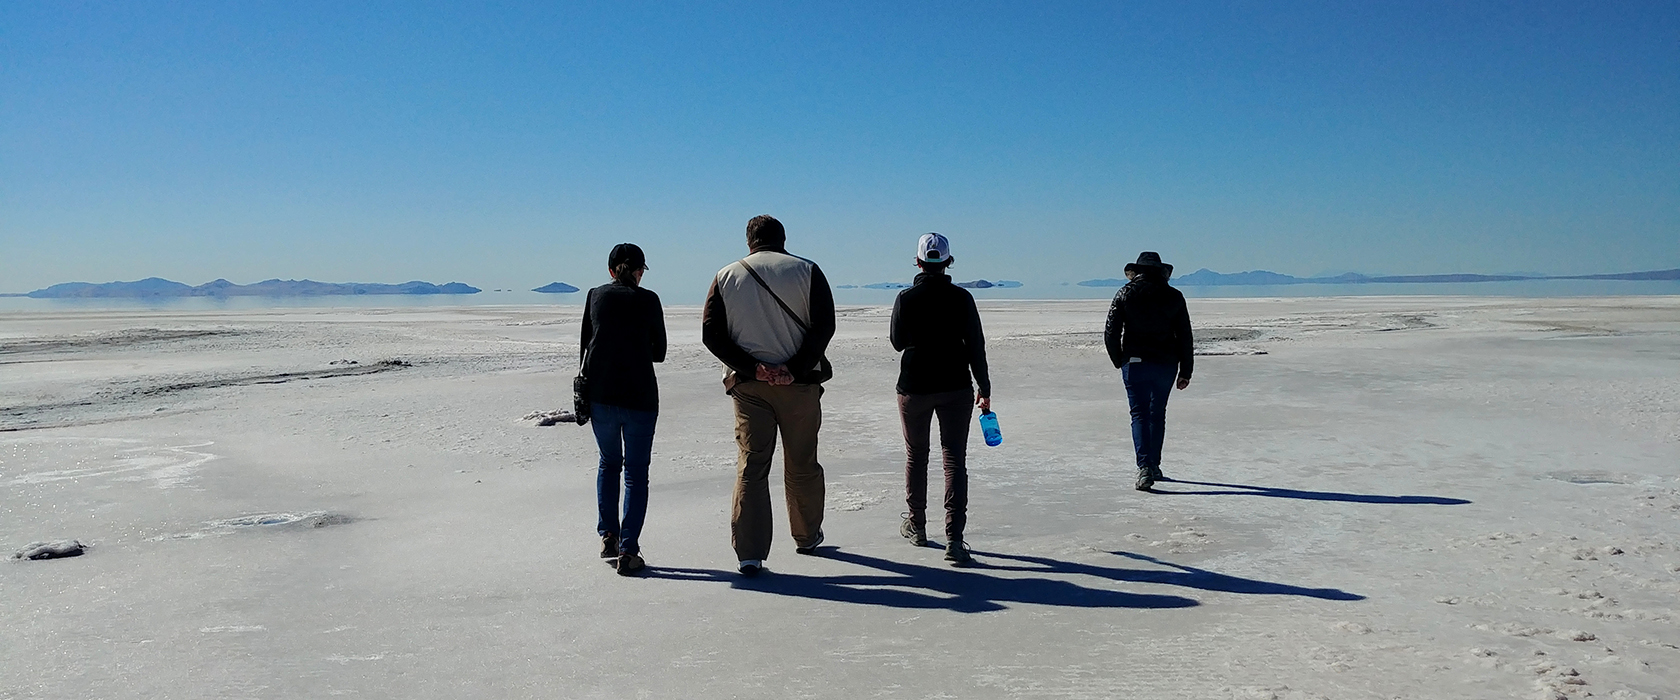 Group of people on the shore of the Great Salt Lake